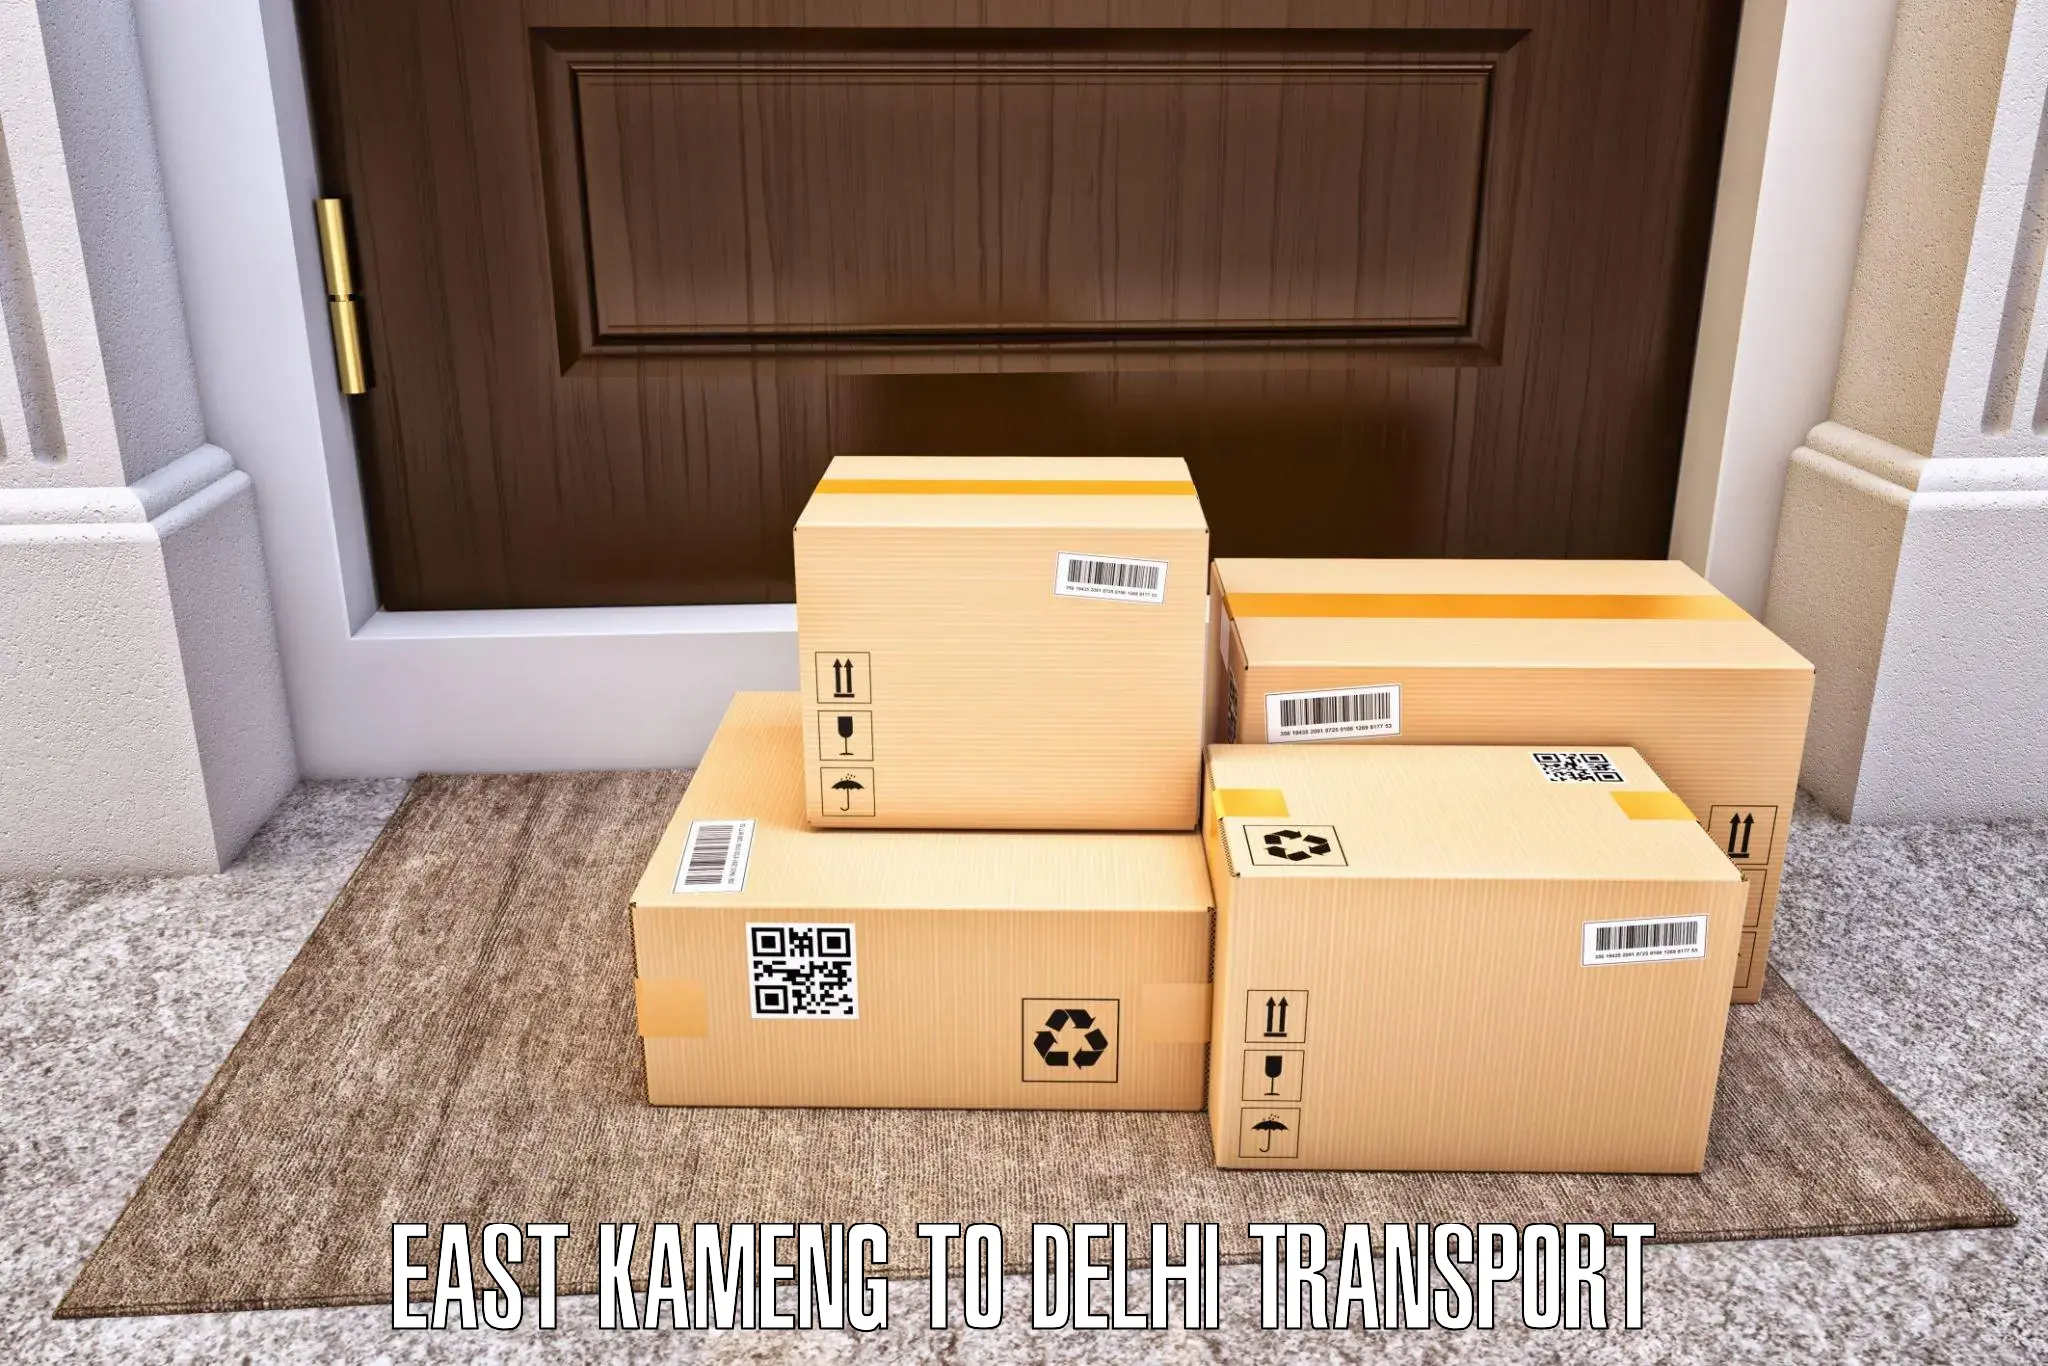 Daily transport service East Kameng to Naraina Industrial Estate